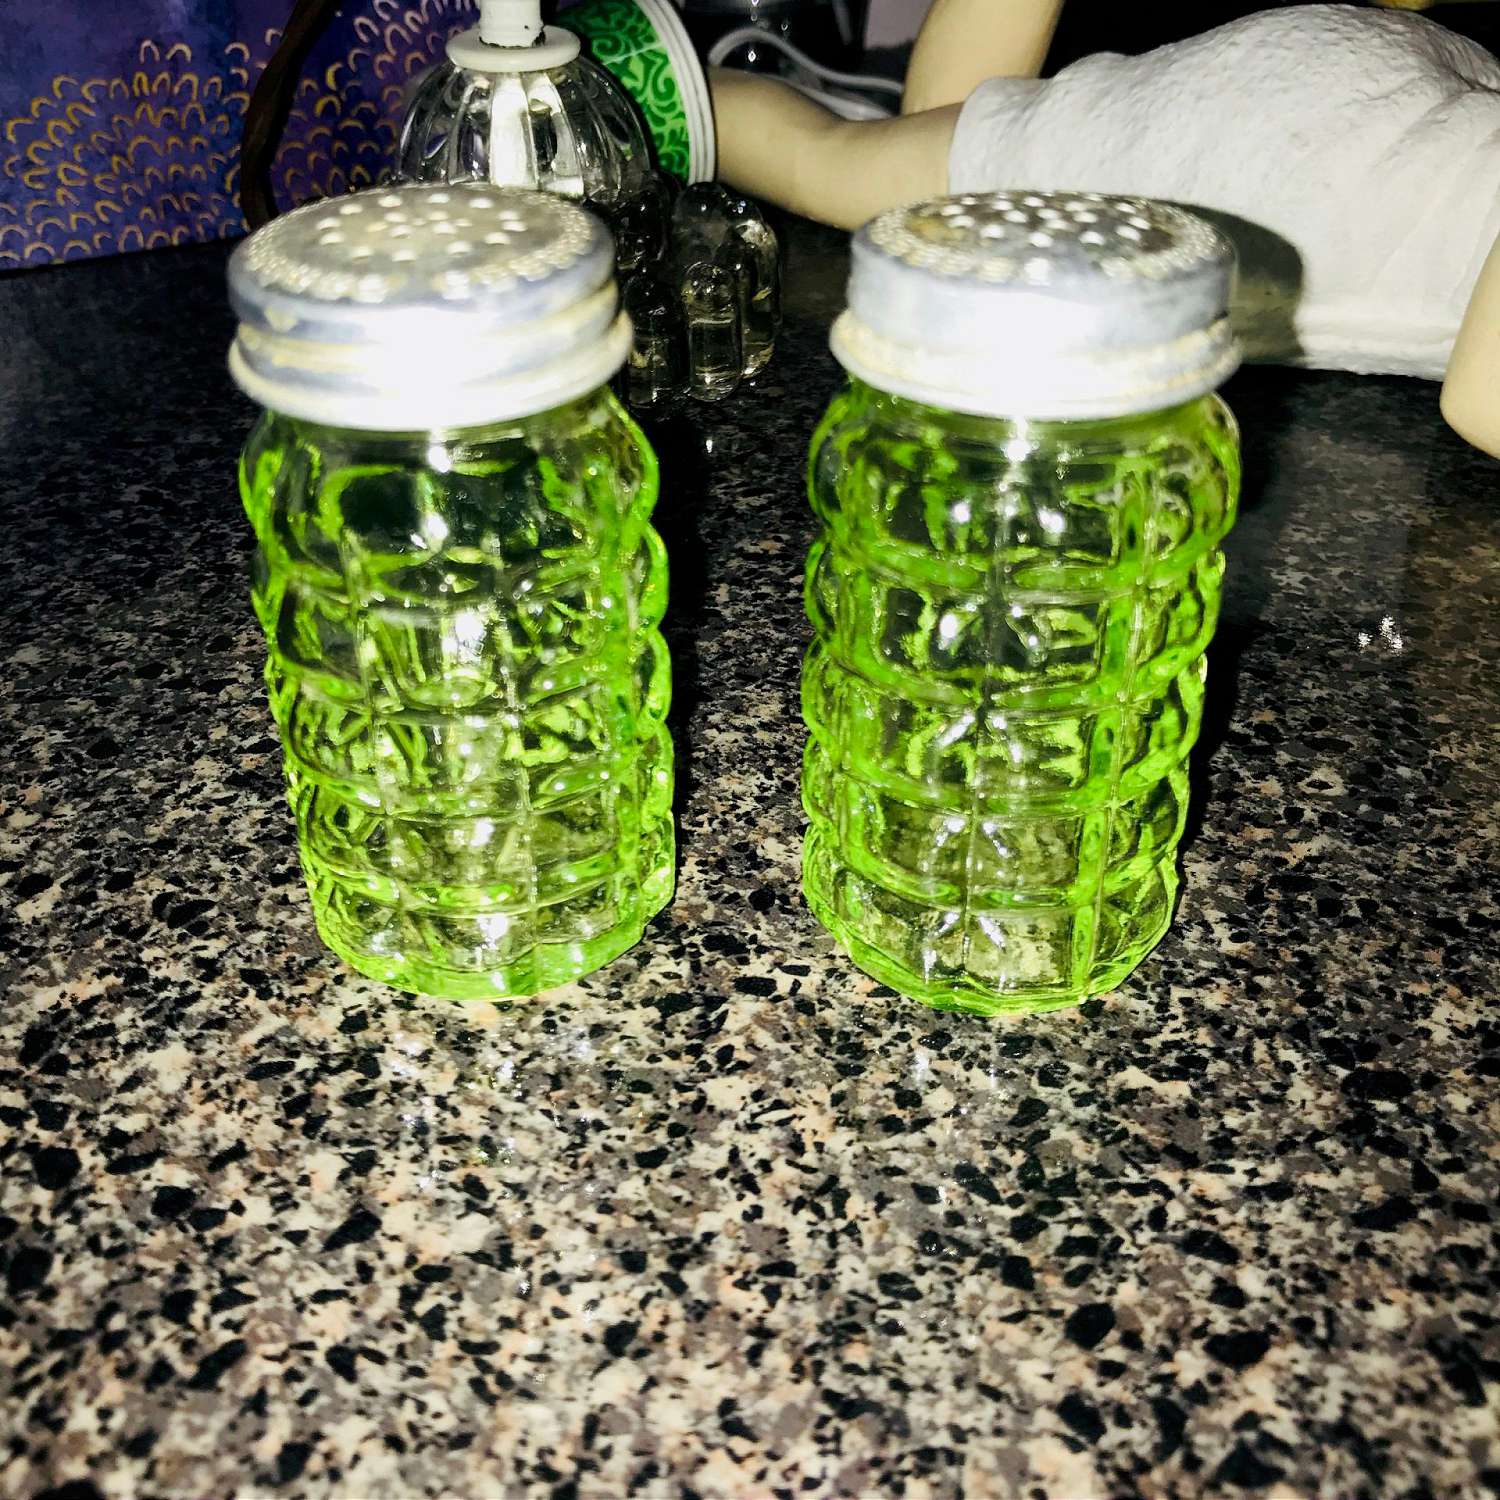 https://www.truevintageantiques.com/wp-content/uploads/2019/12/kitchen-apothecary-salt-pepper-shakers-uranium-glass-glow-under-blacklight-bright-green-farmhouse-cottage-collectible-display-retro-5dfb89d66-scaled.jpg